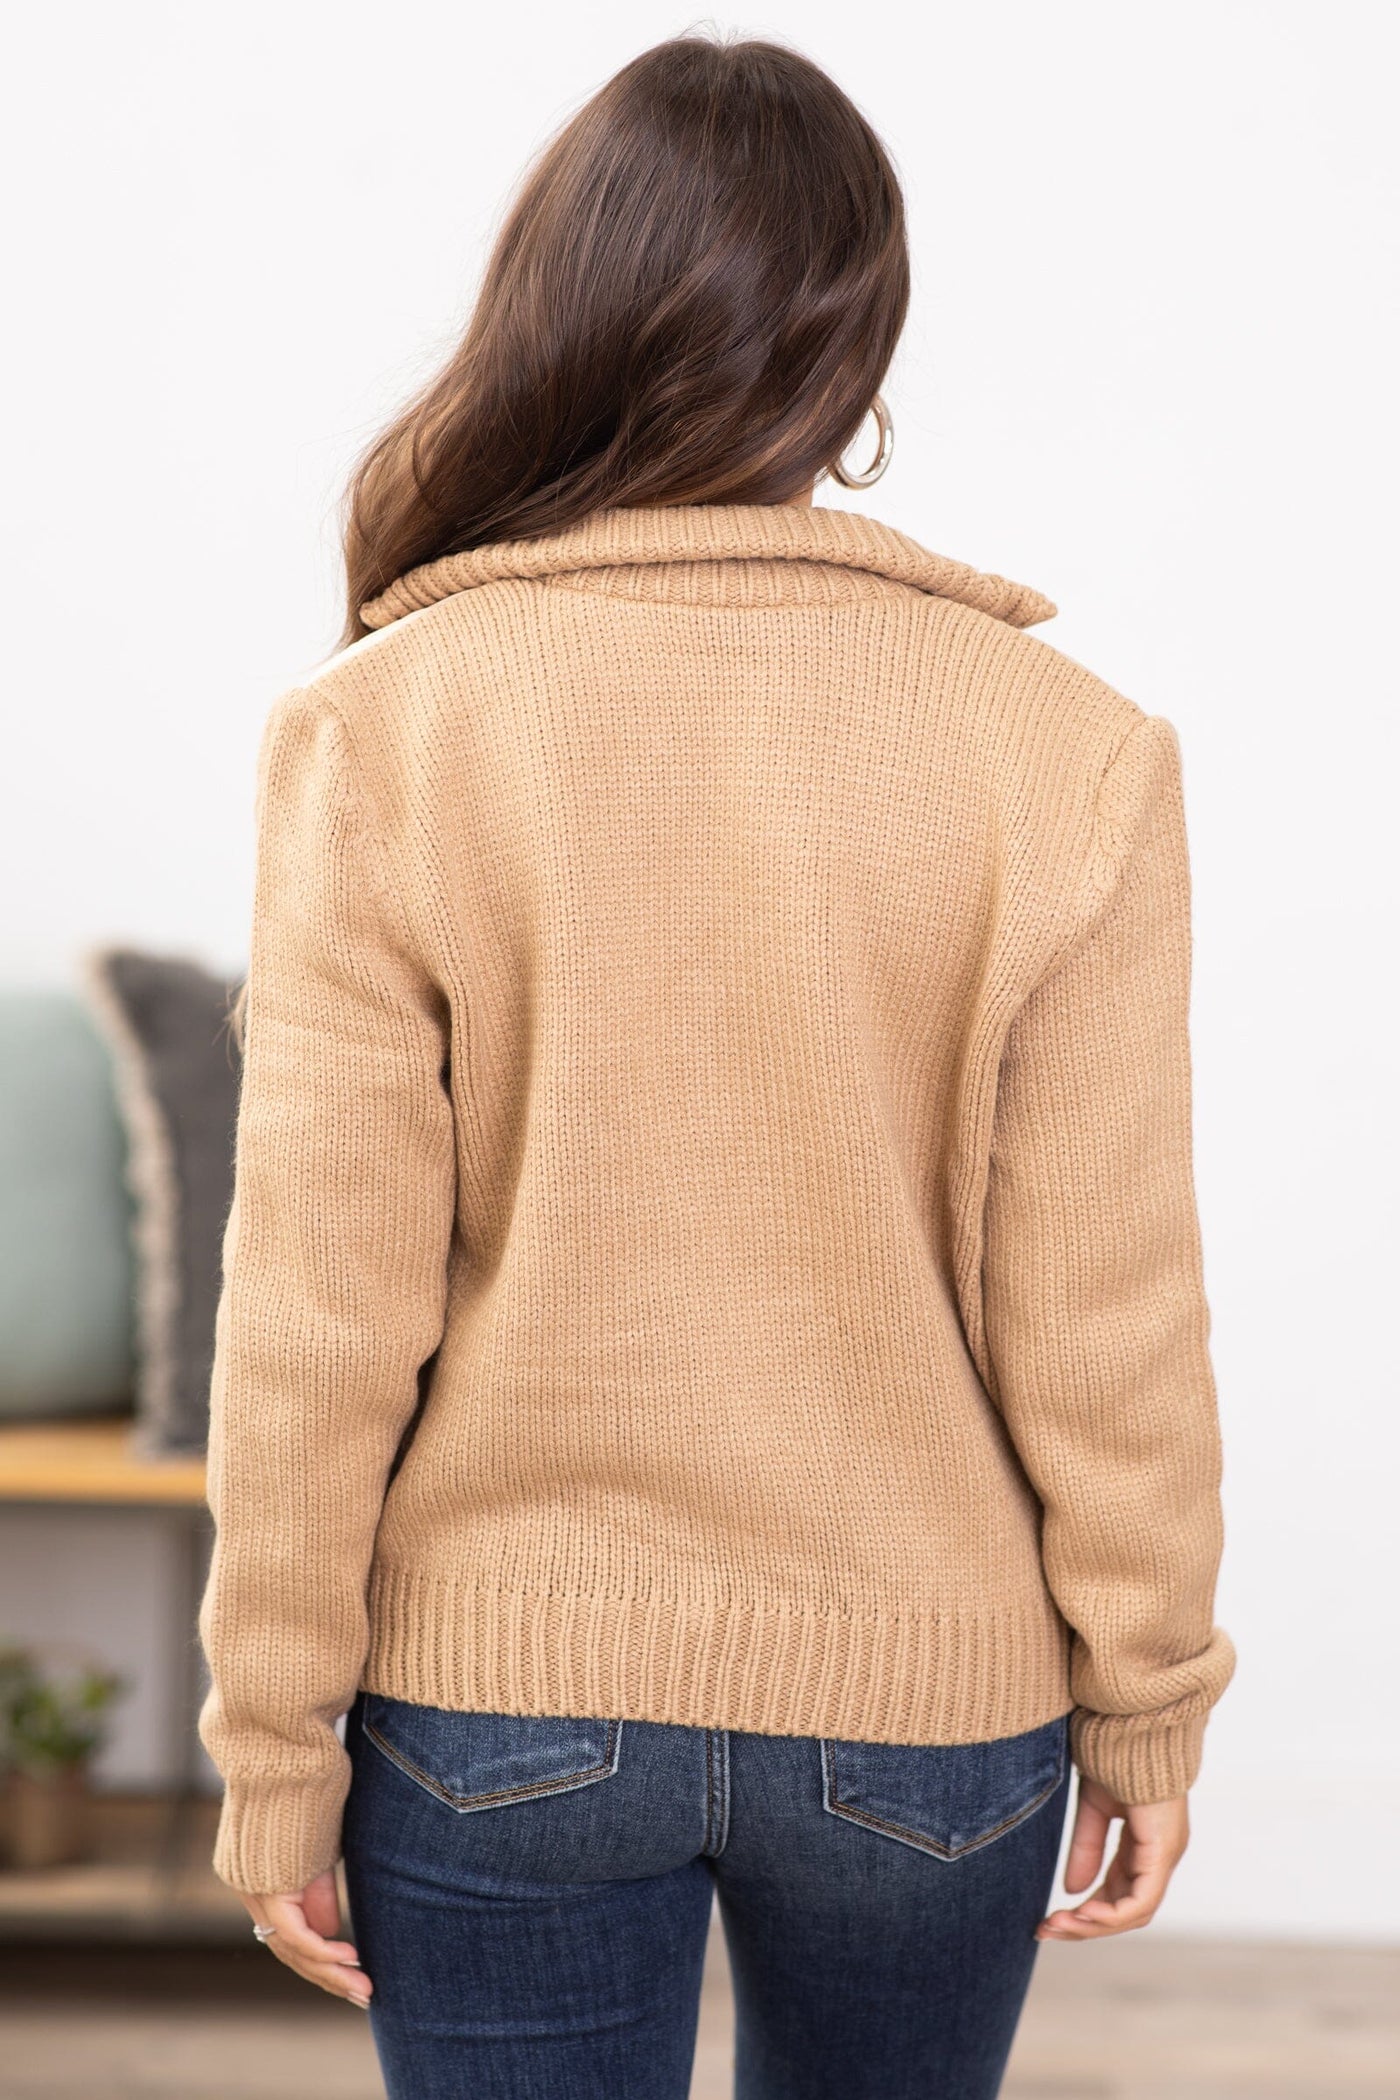 Tan Channel Quilted Jacket With Knit Back - Filly Flair